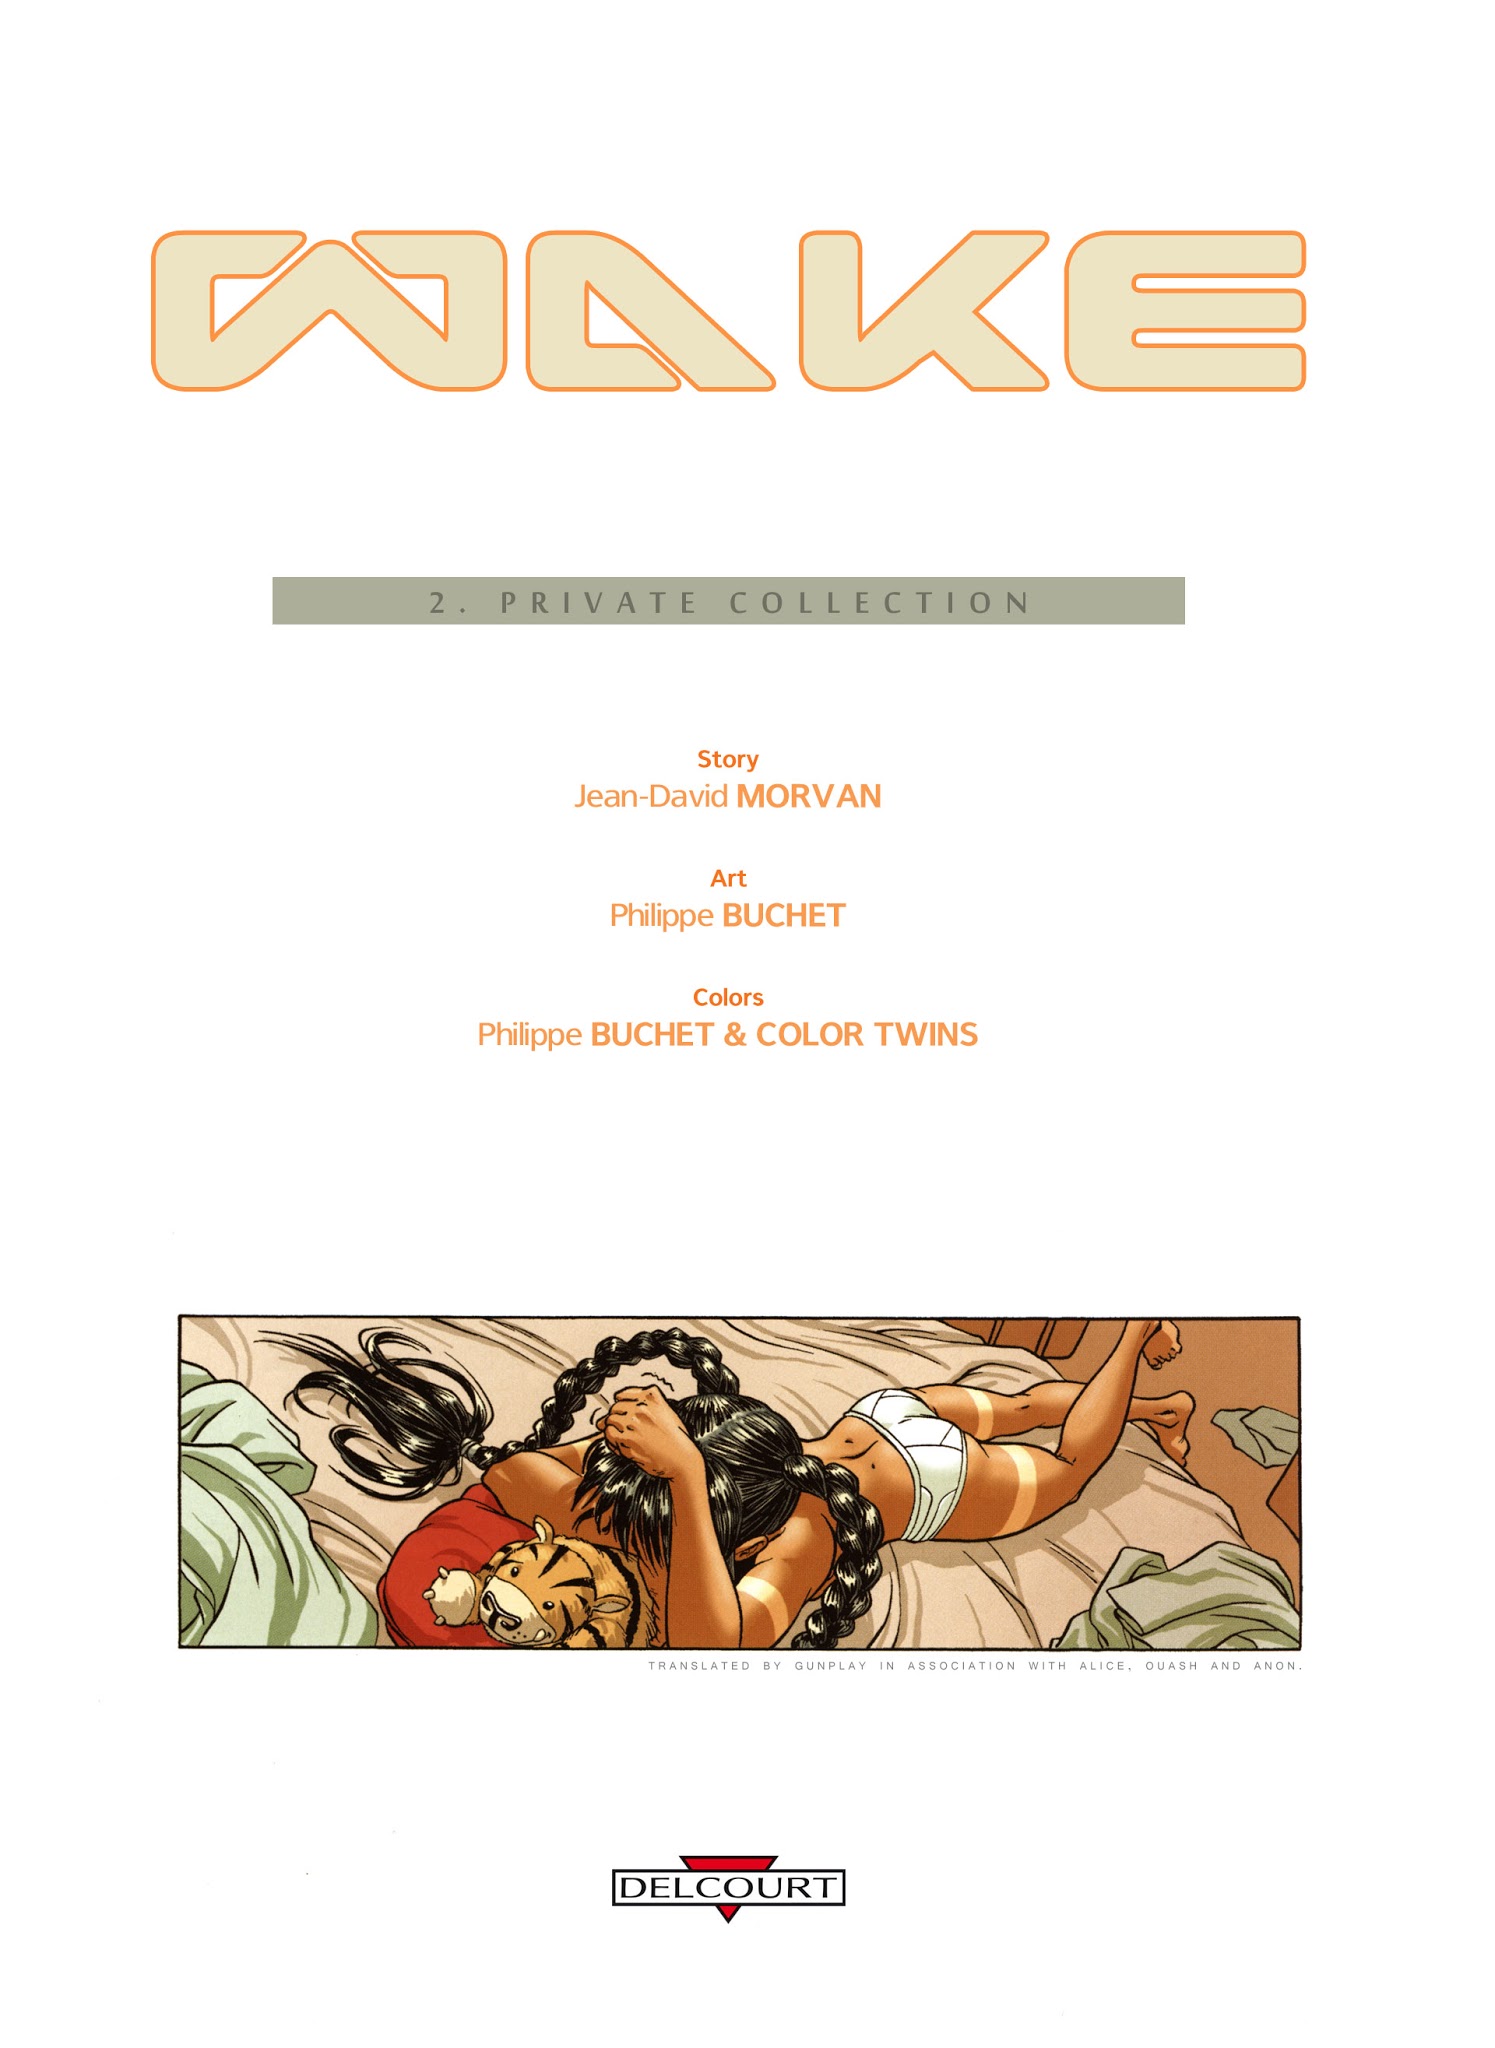 Read online Wake comic -  Issue #2 - 2